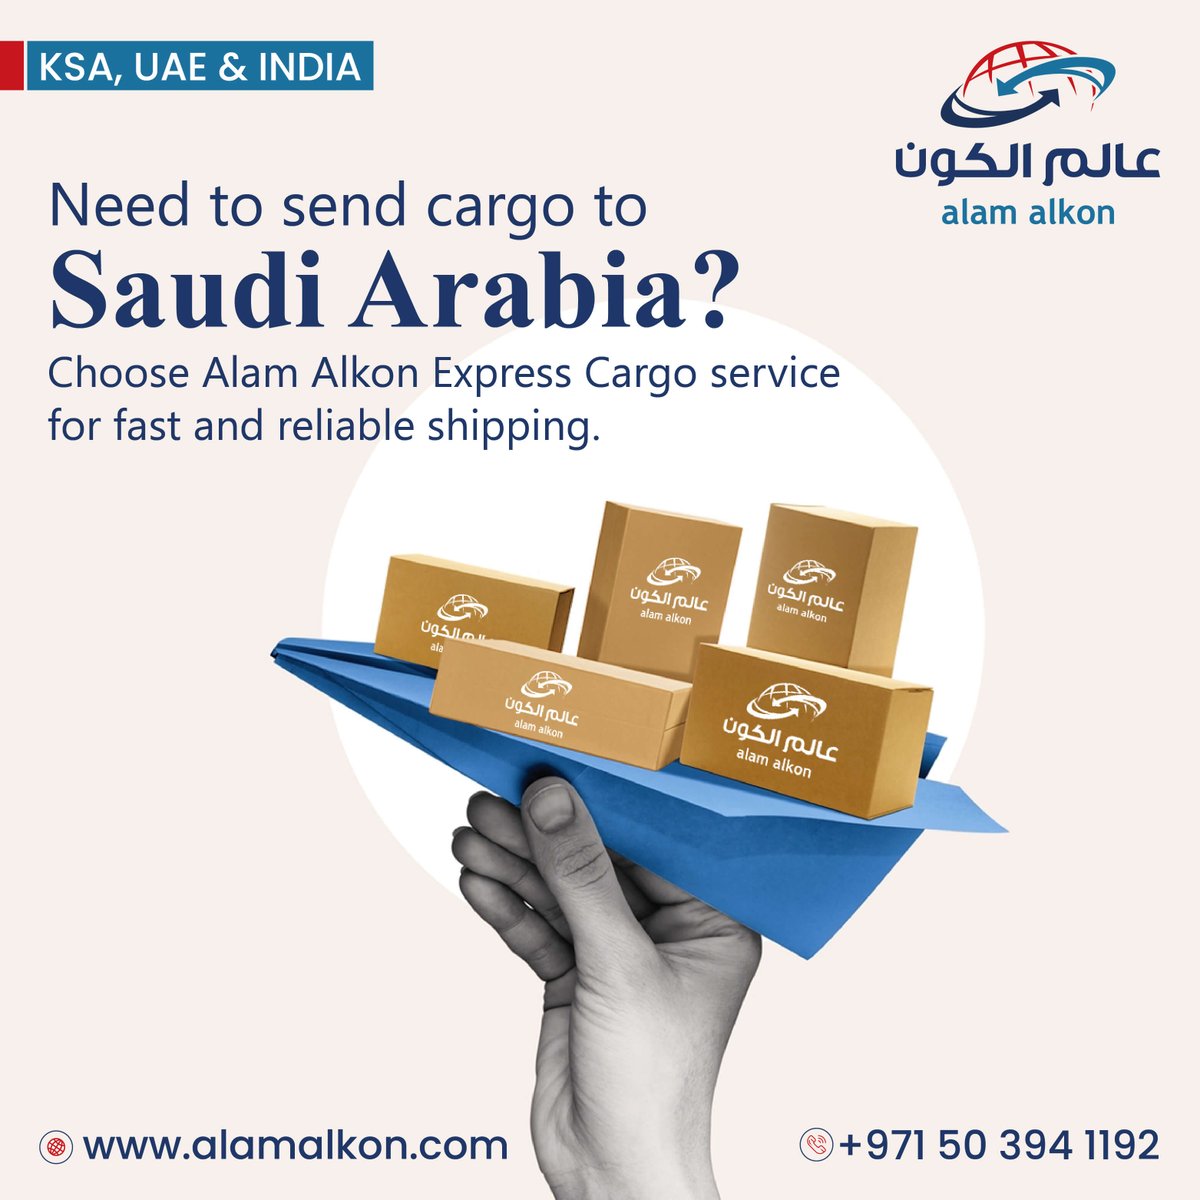 Need to send cargo to #SaudiArabia? Look no further! Choose Alam Alkon #ExpressCargo service for fast and reliable shipping. From documents to E-commerce parcels, we've got you covered. Experience hassle-free delivery with competitive rates. Visit our website or contact us today!